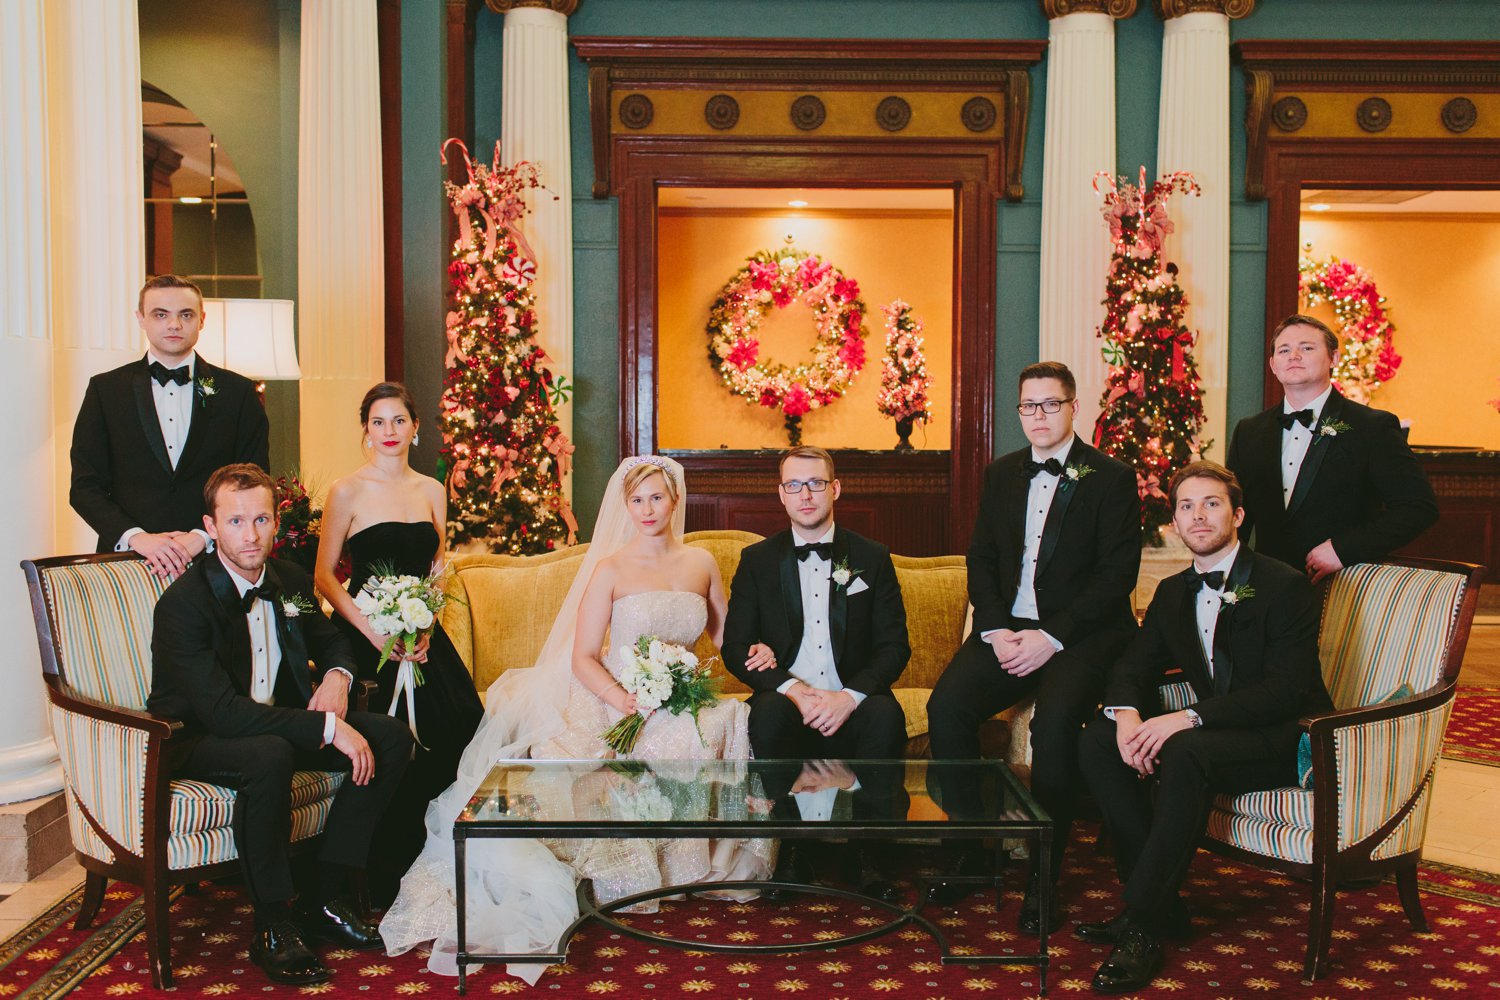 New Year's Eve wedding at The Jefferson Hotel